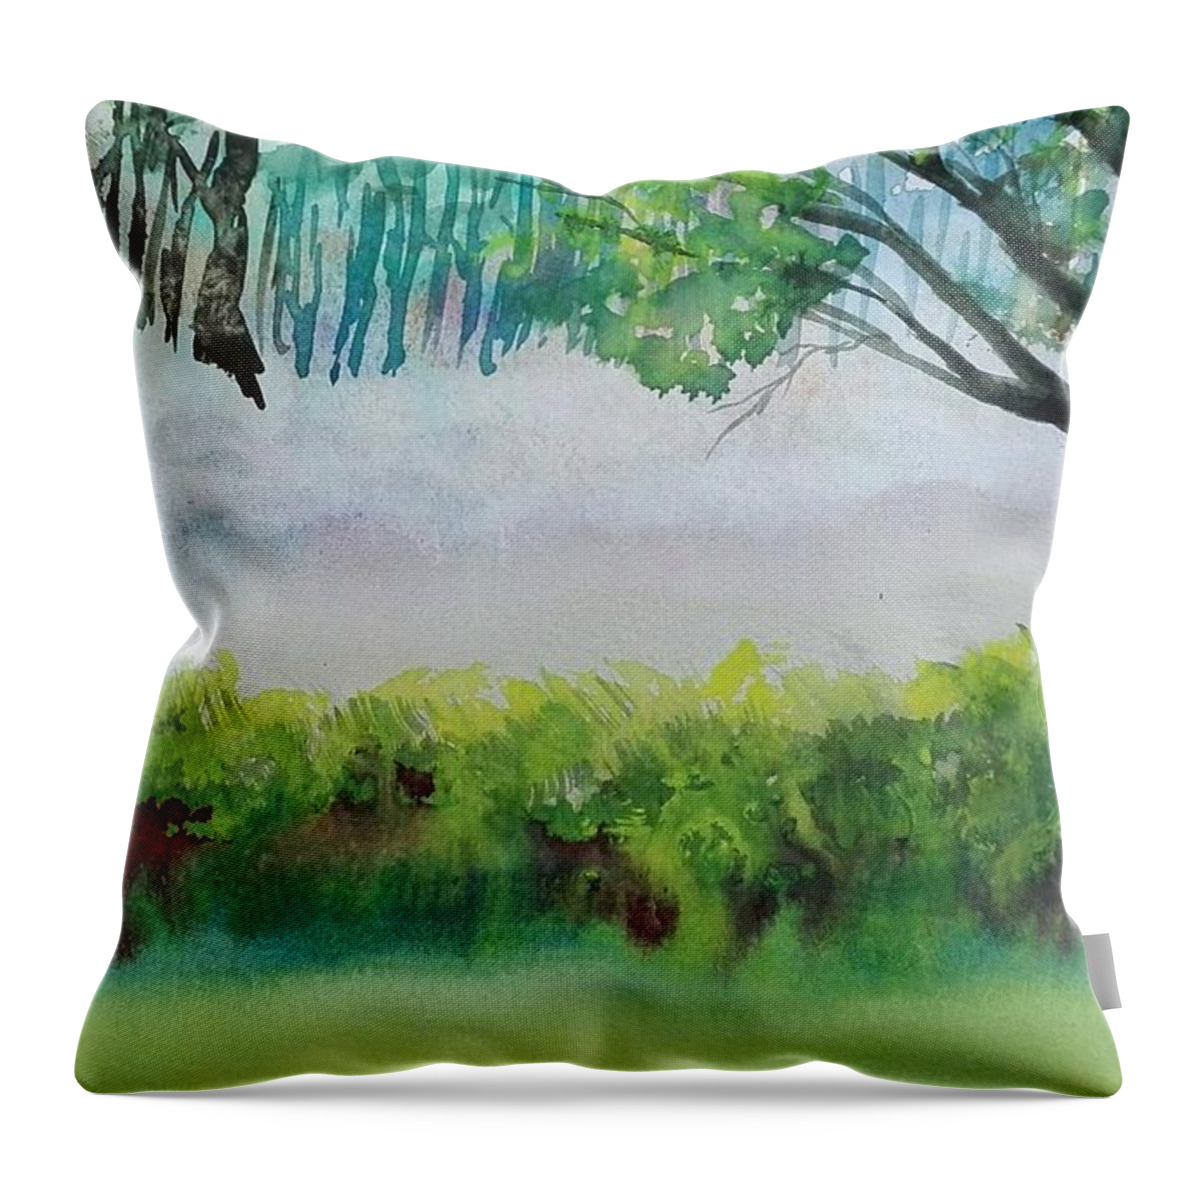 Mist Throw Pillow featuring the painting Mist by Sandie Croft